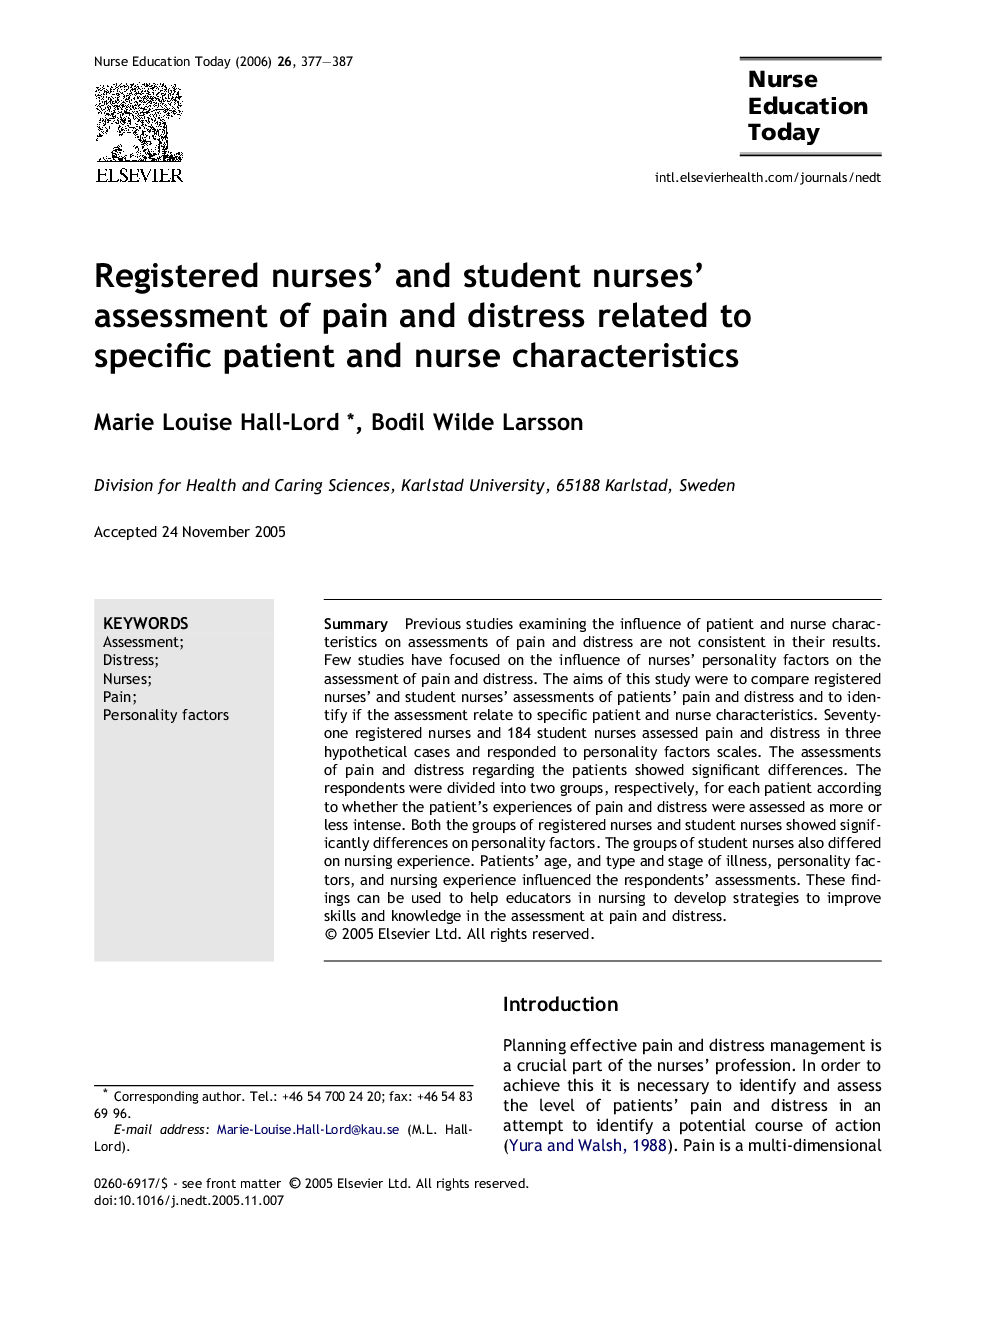 Registered nurses’ and student nurses’ assessment of pain and distress related to specific patient and nurse characteristics